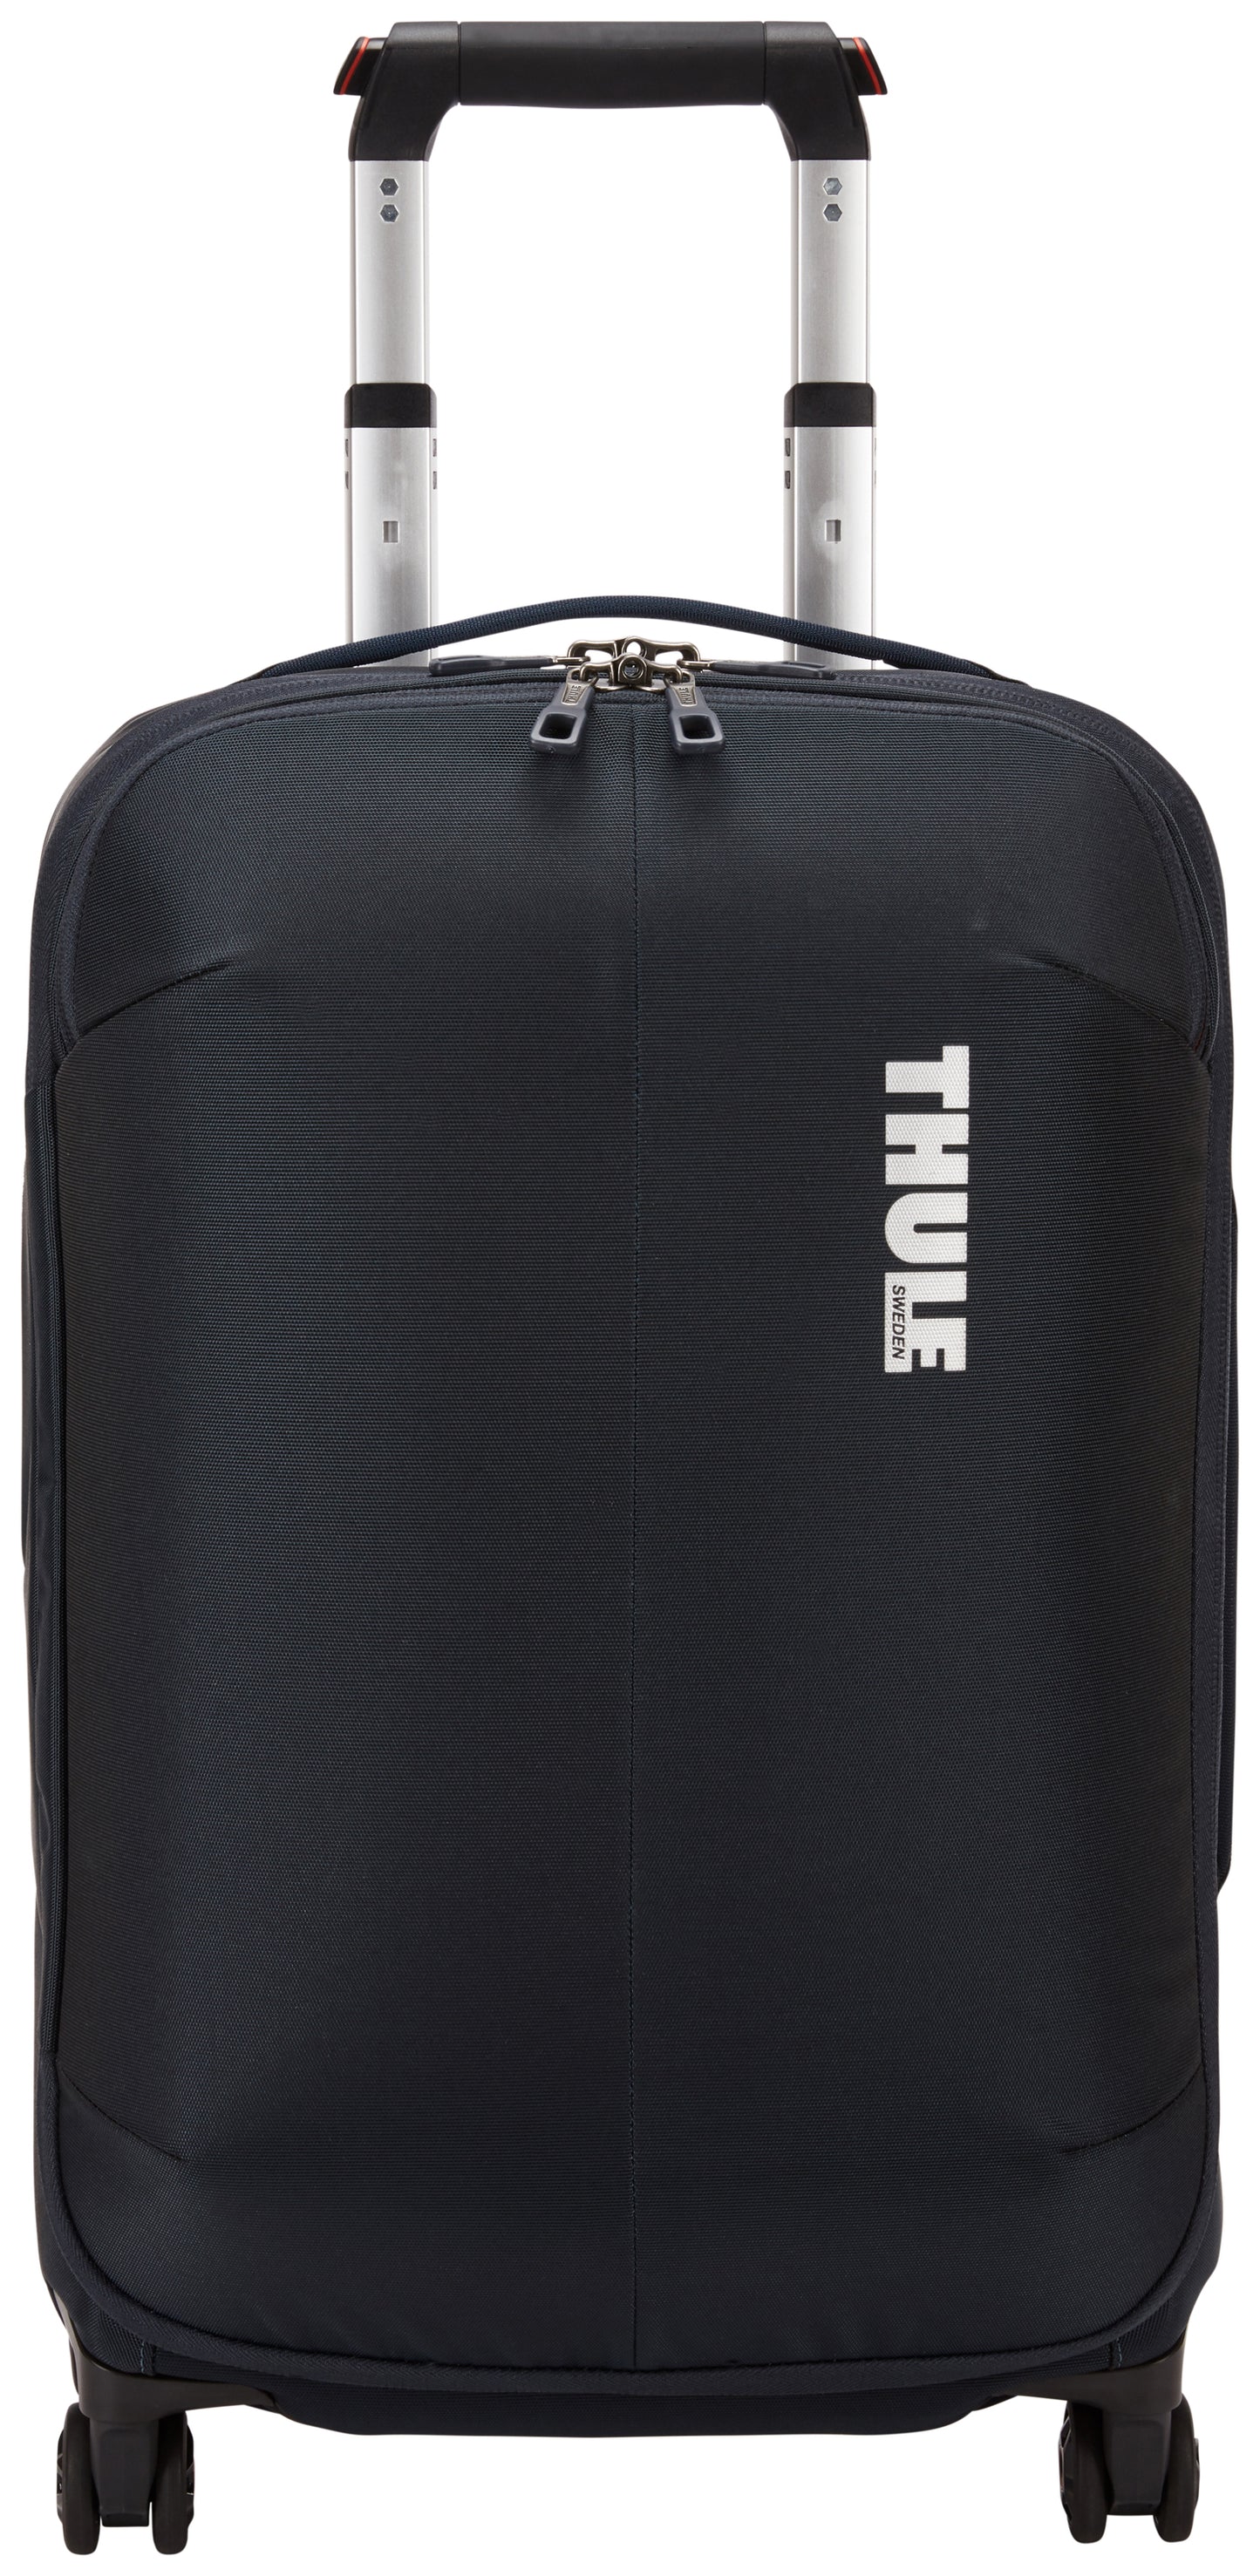 Hand Luggage Suitcase Thule Subterra Spinner 33L Mineral TSRS-322